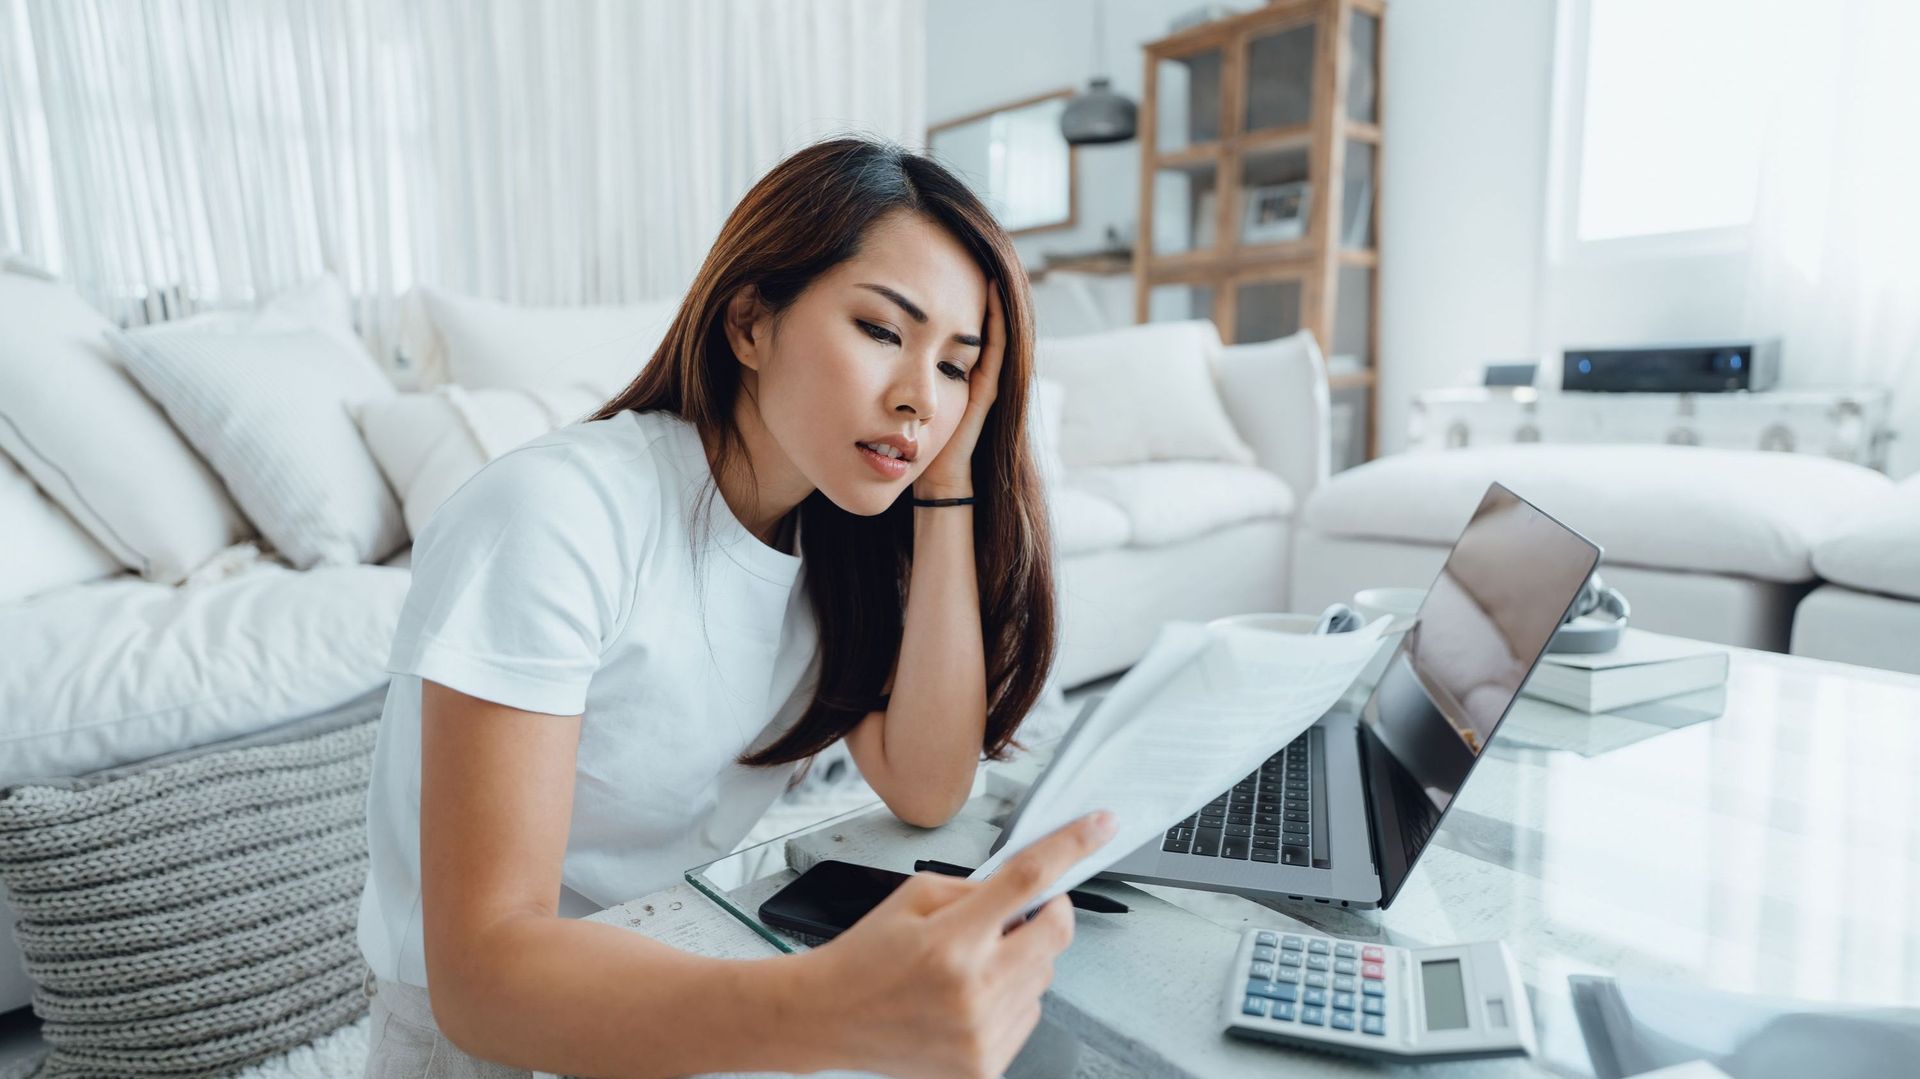 Woman looking worried while going through financial bills.